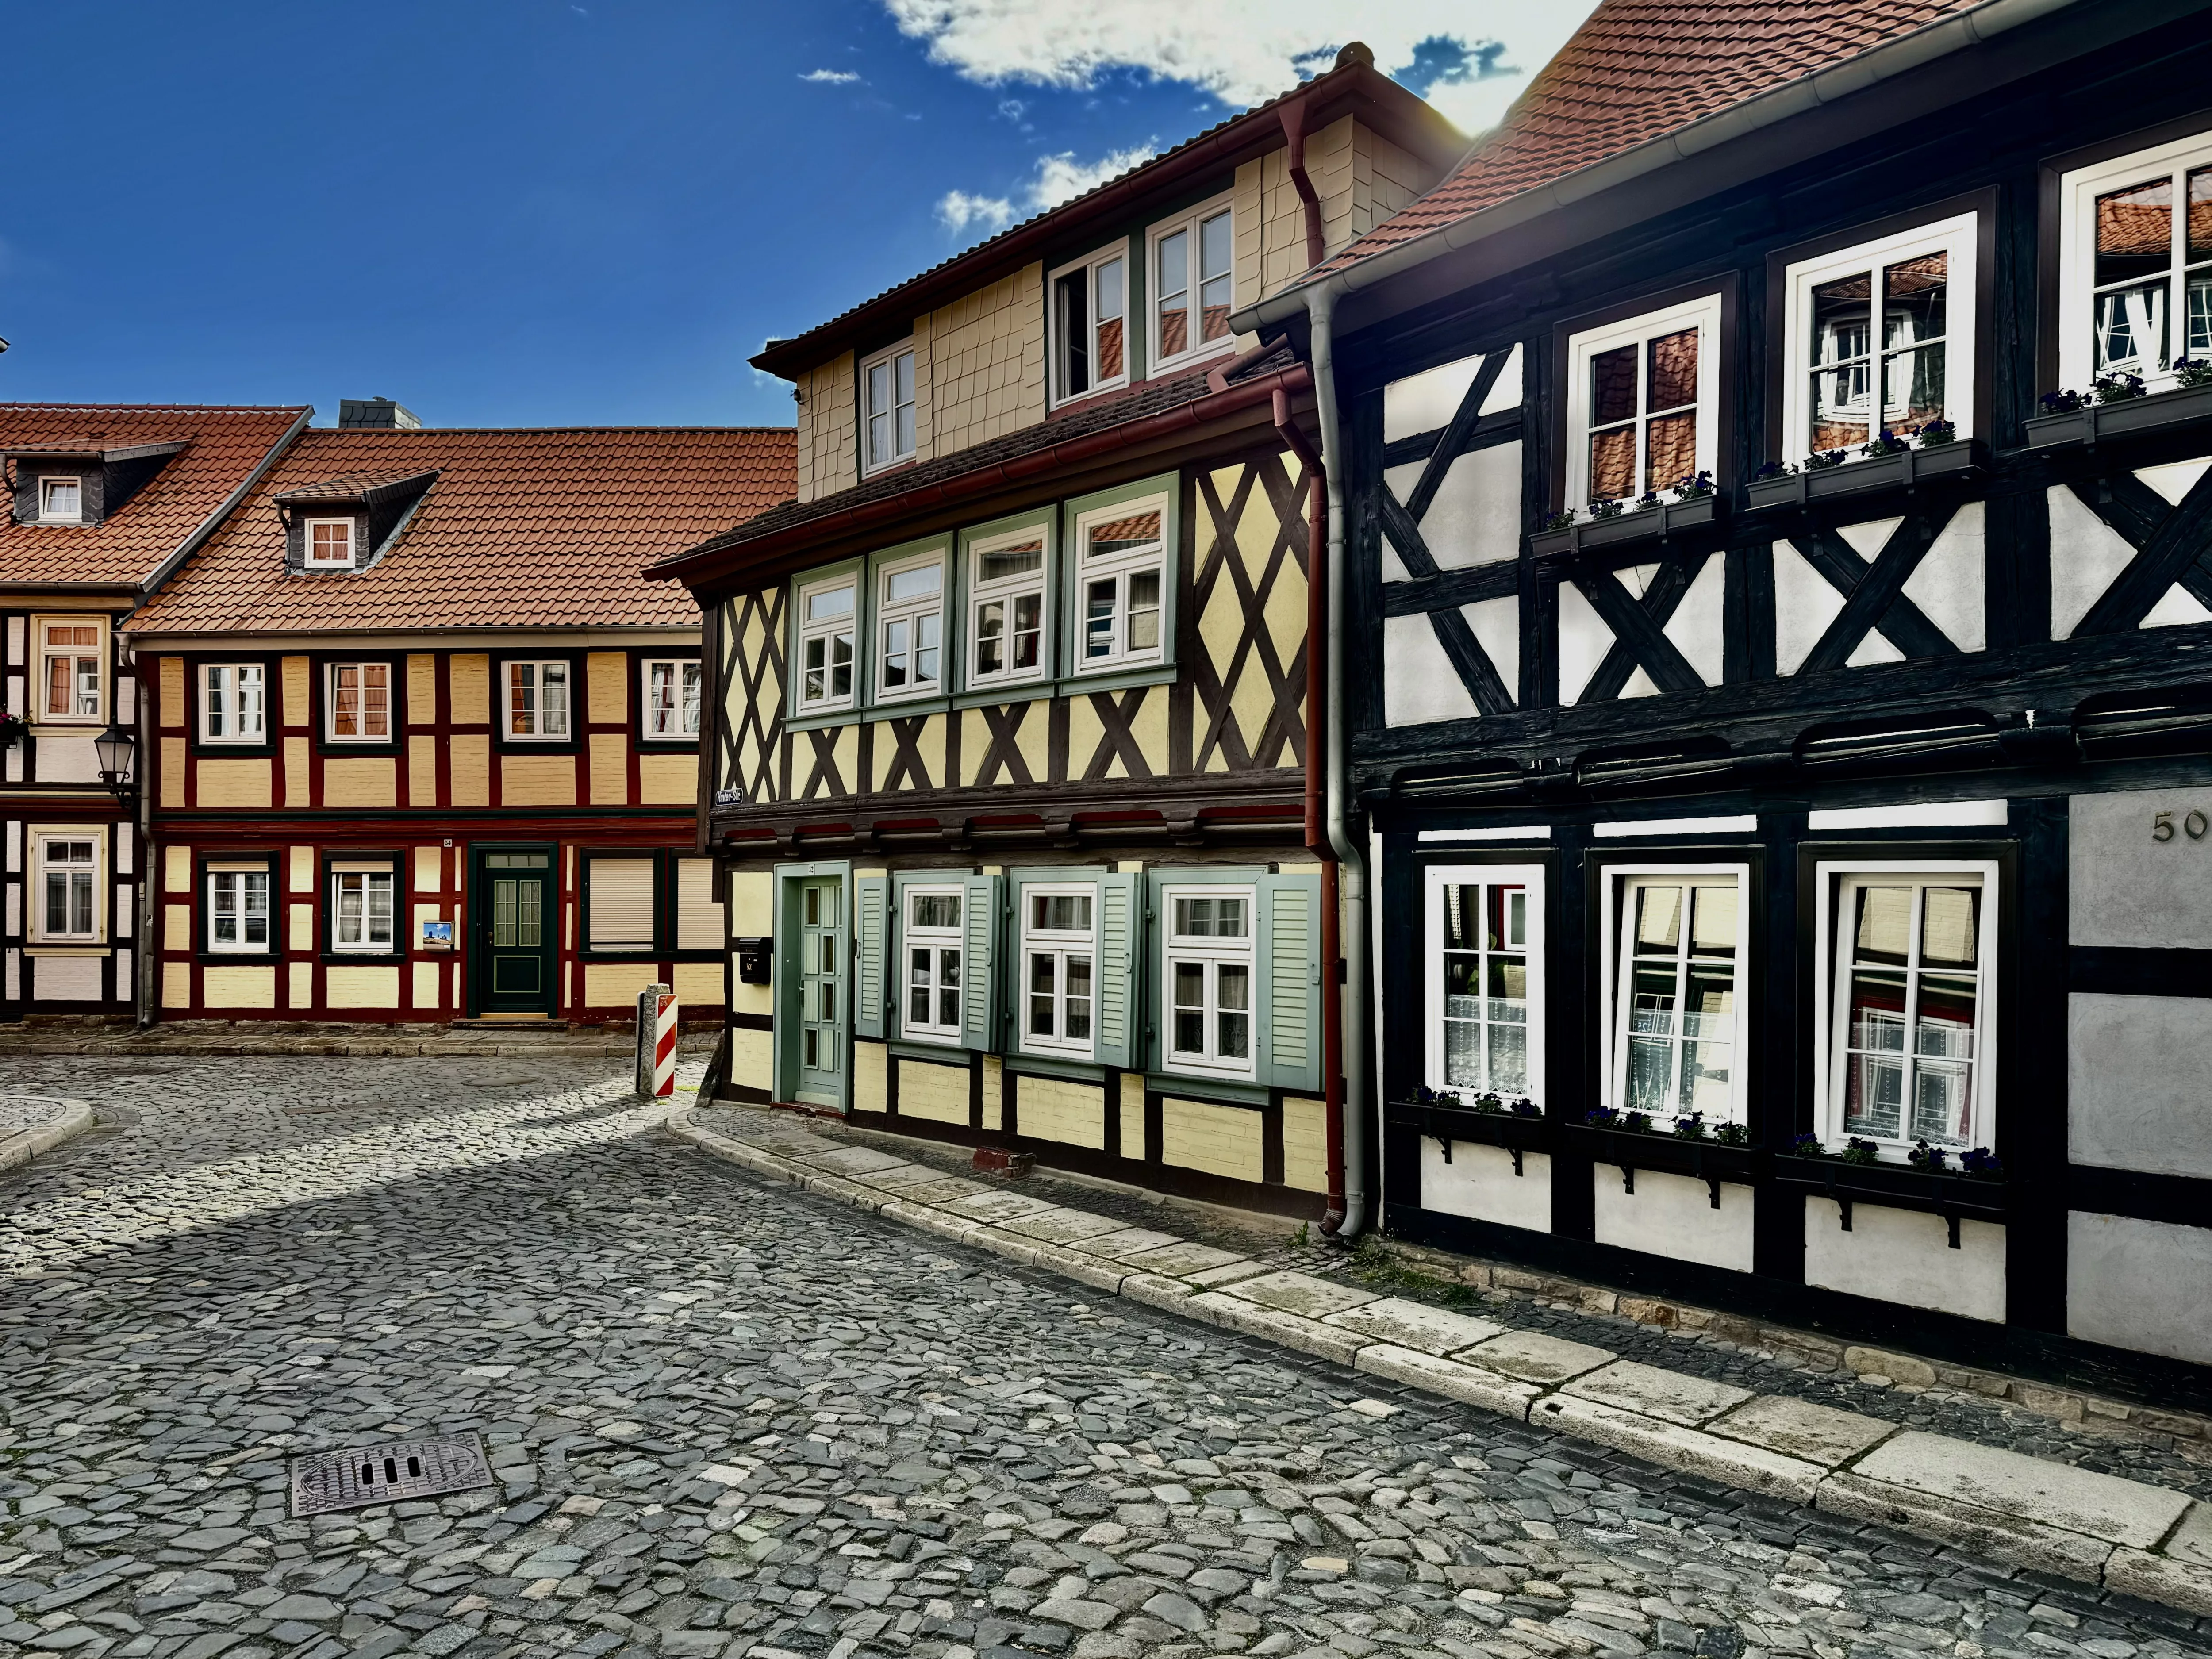 Old town Wernigerode,Germany